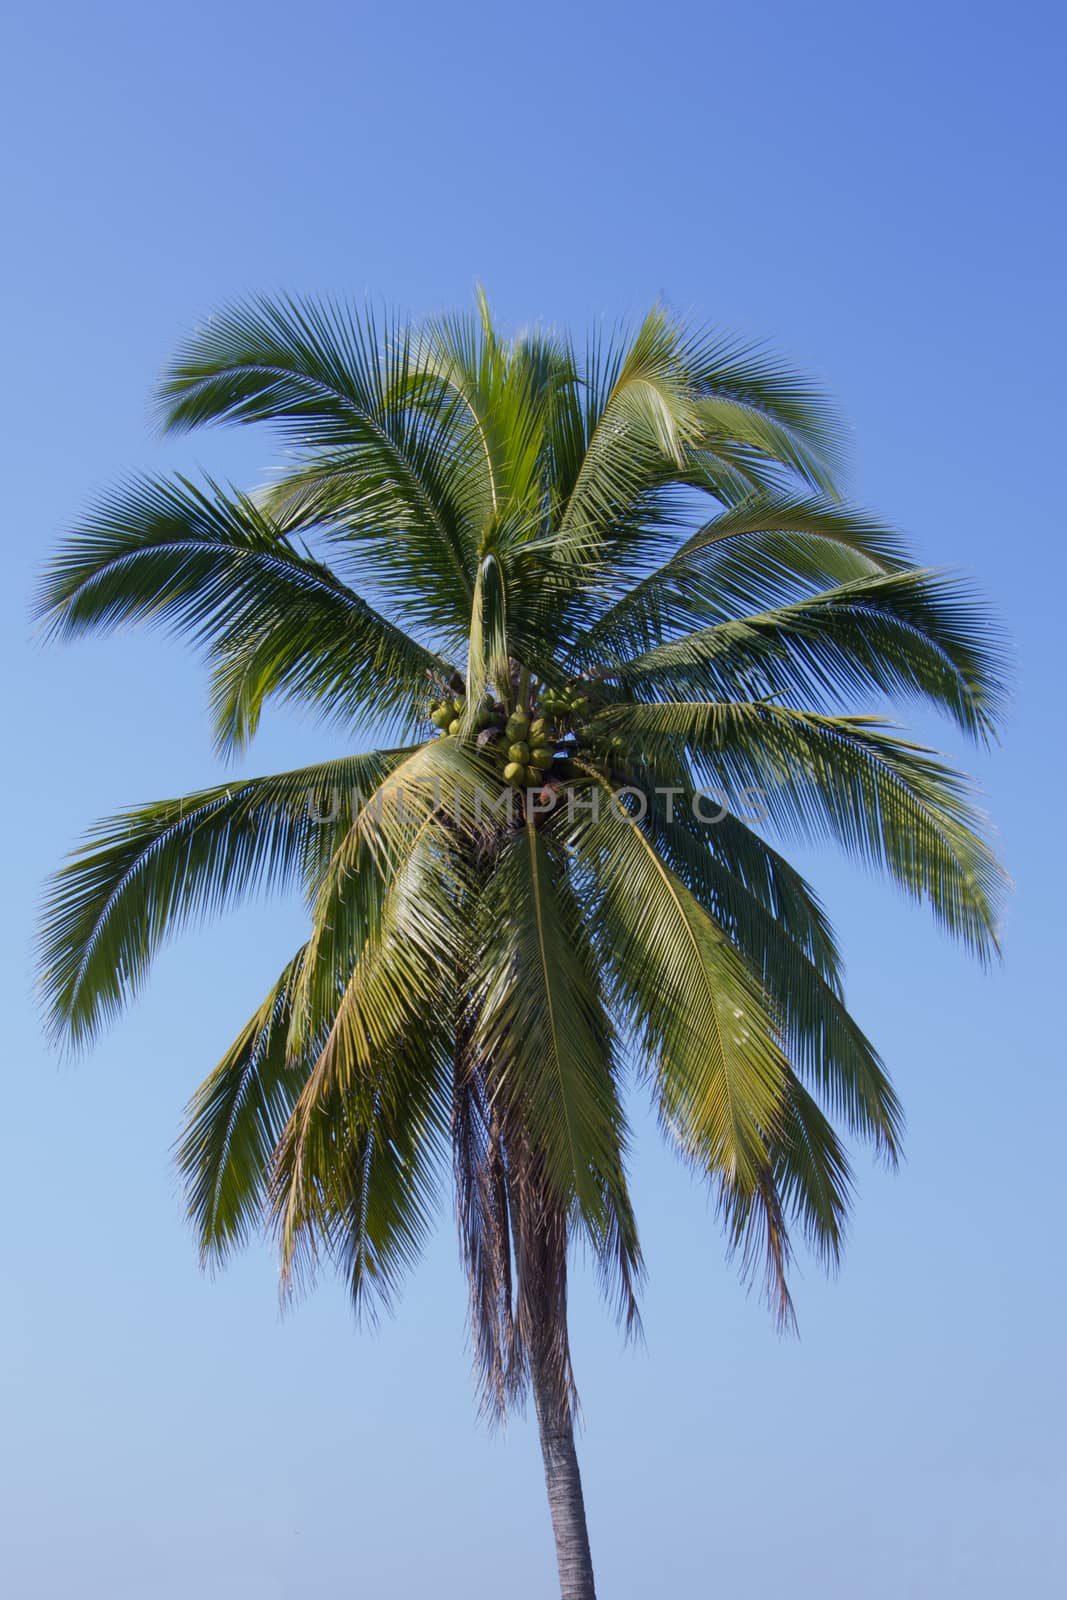 coconut tree by a3701027